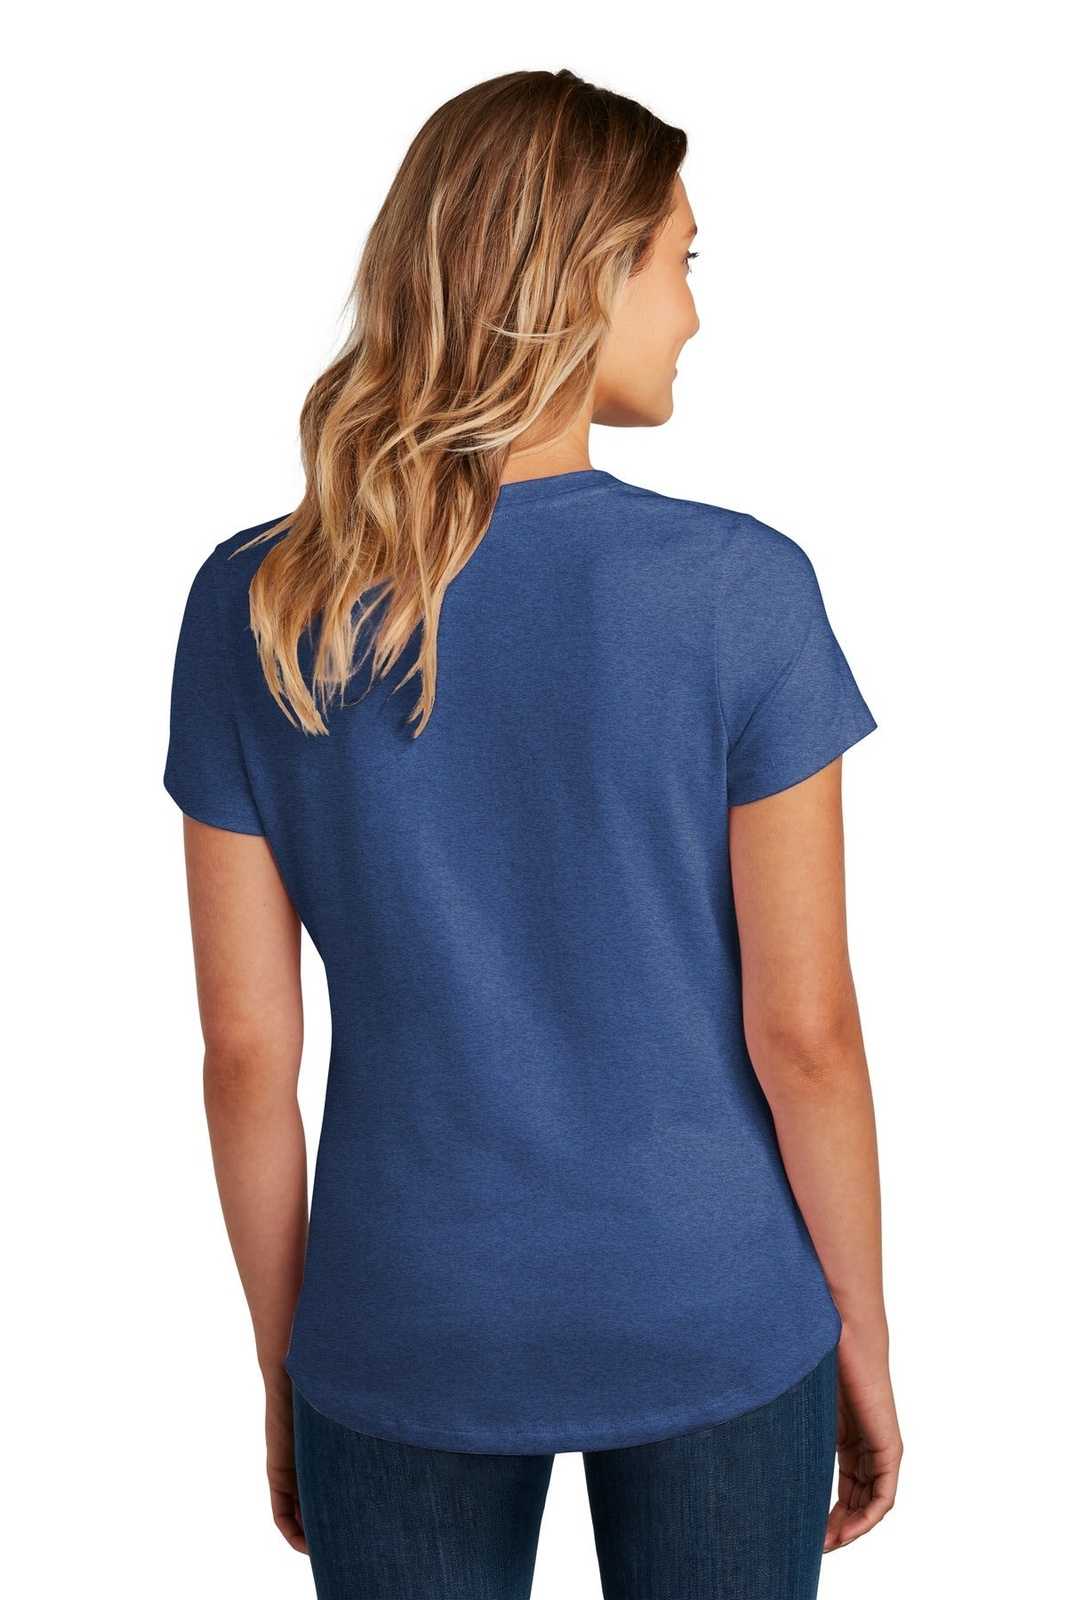 District DT7501 Womens Flex Scoop Neck Tee - Heathered Deep Royal - HIT a Double - 2